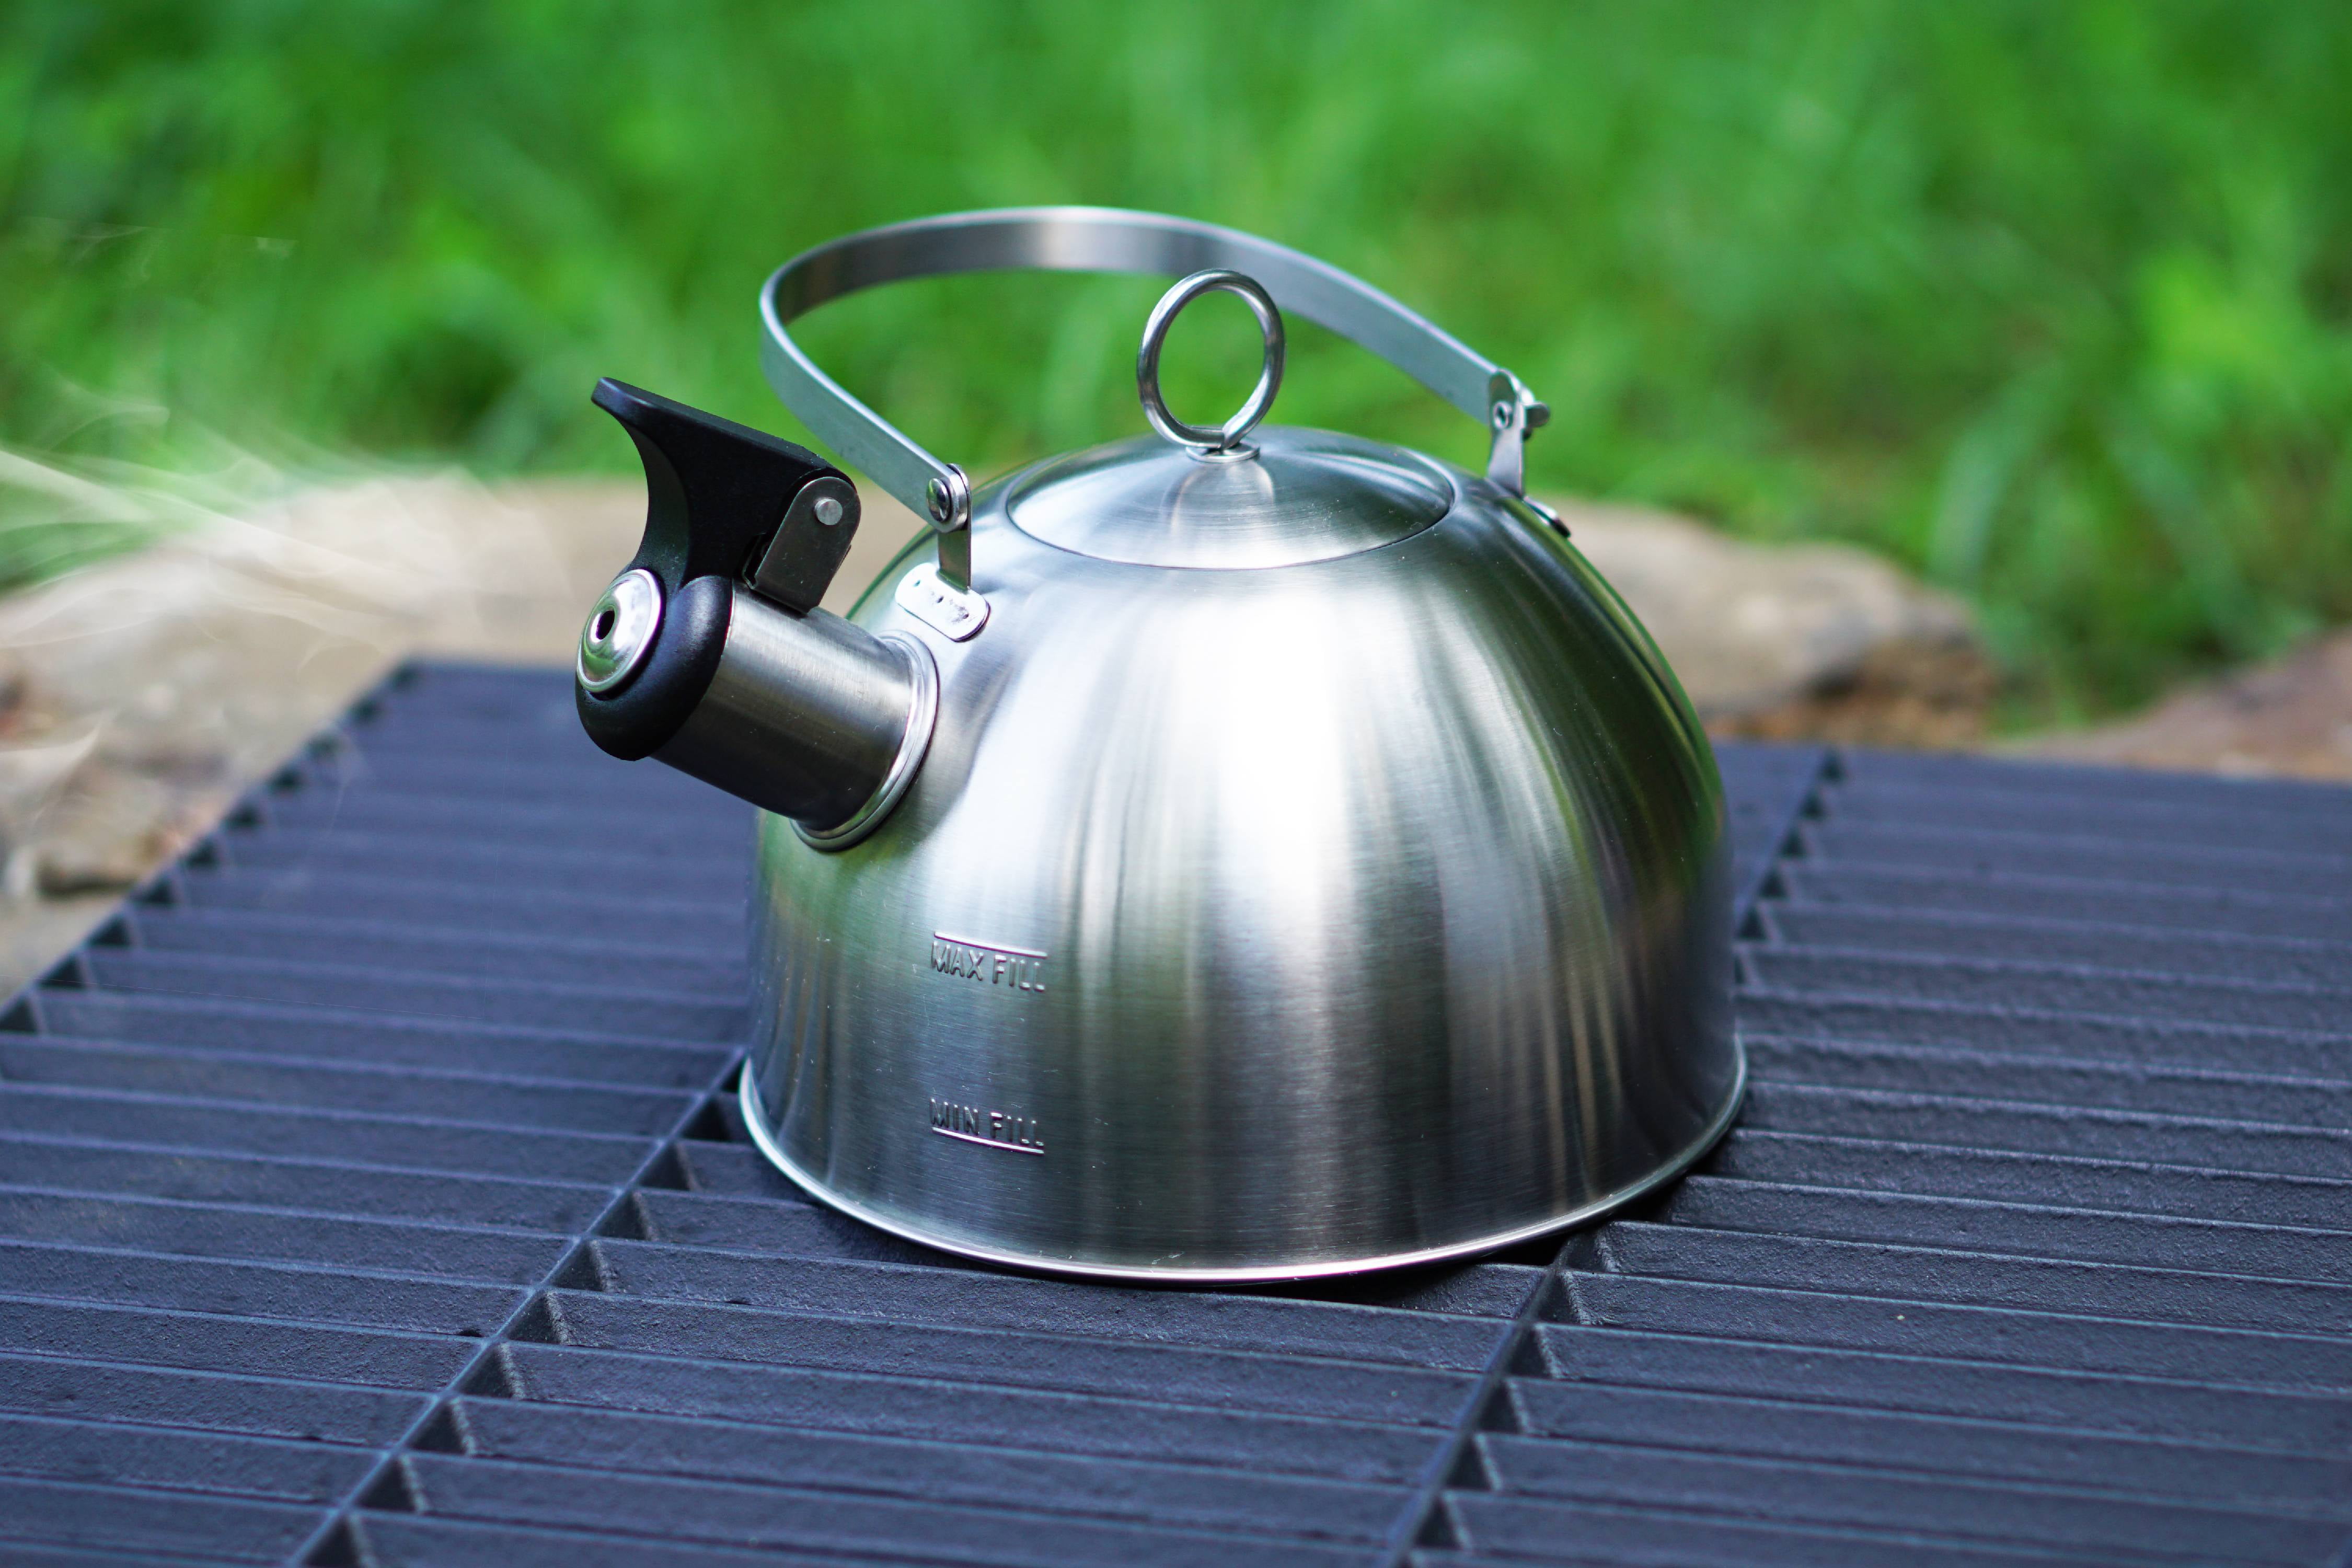 WOONEKY Whistle Kettle Stainless Steel Kettle Camping Tea Kettle